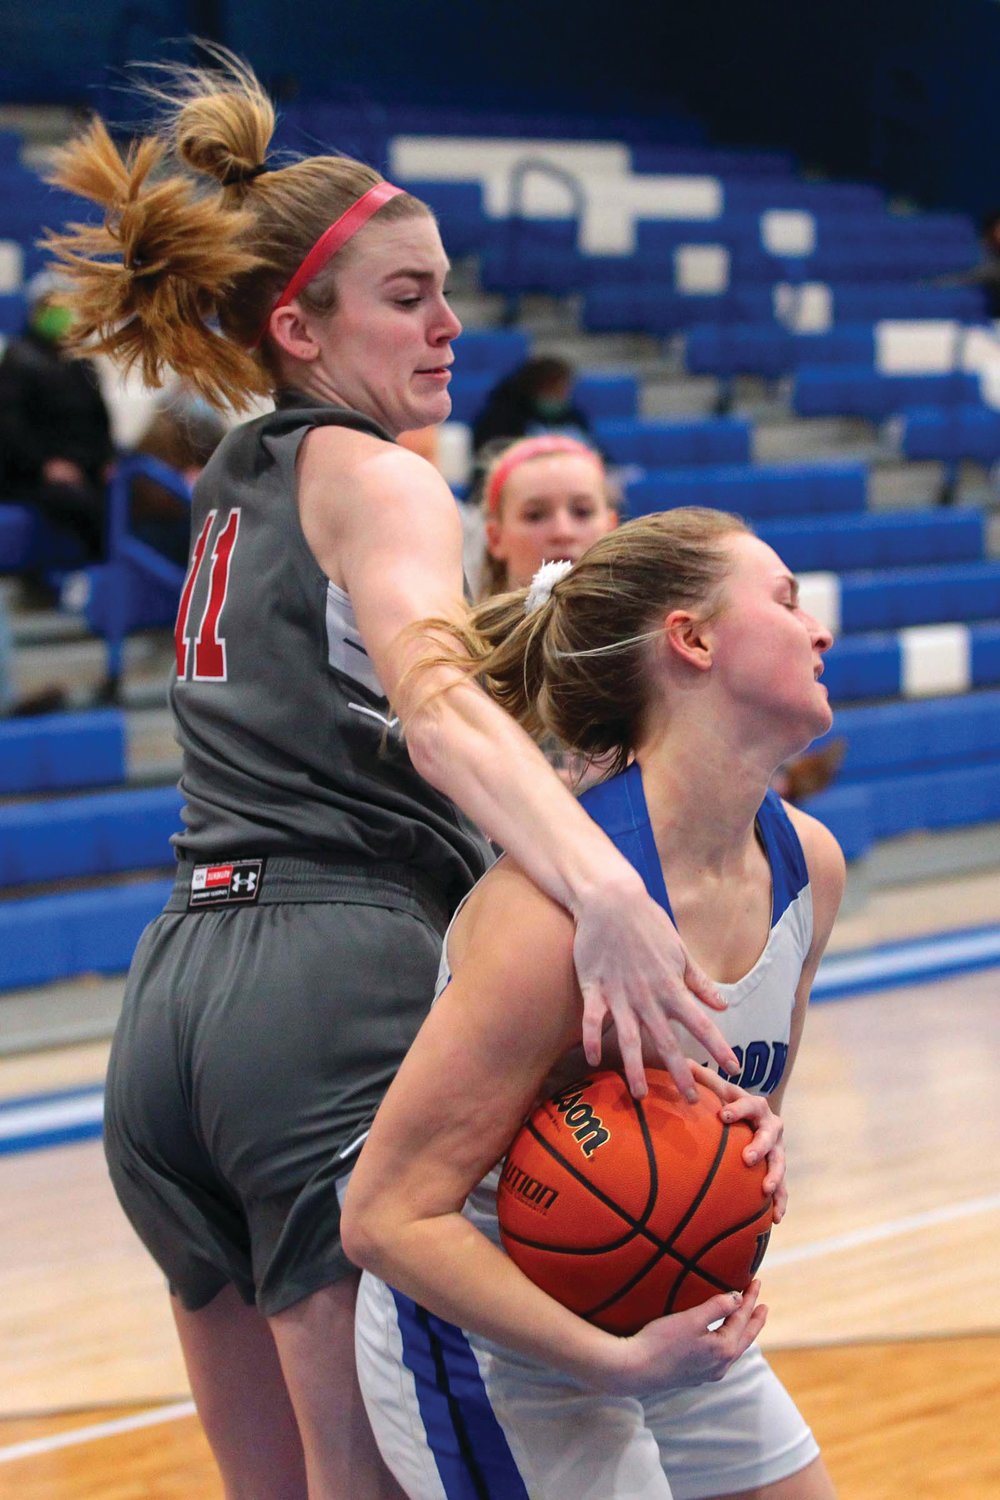 Sidney Veatch of Southmont tries to tip the ball away from Ava Martin of North Vermillion in a game earlier this week.